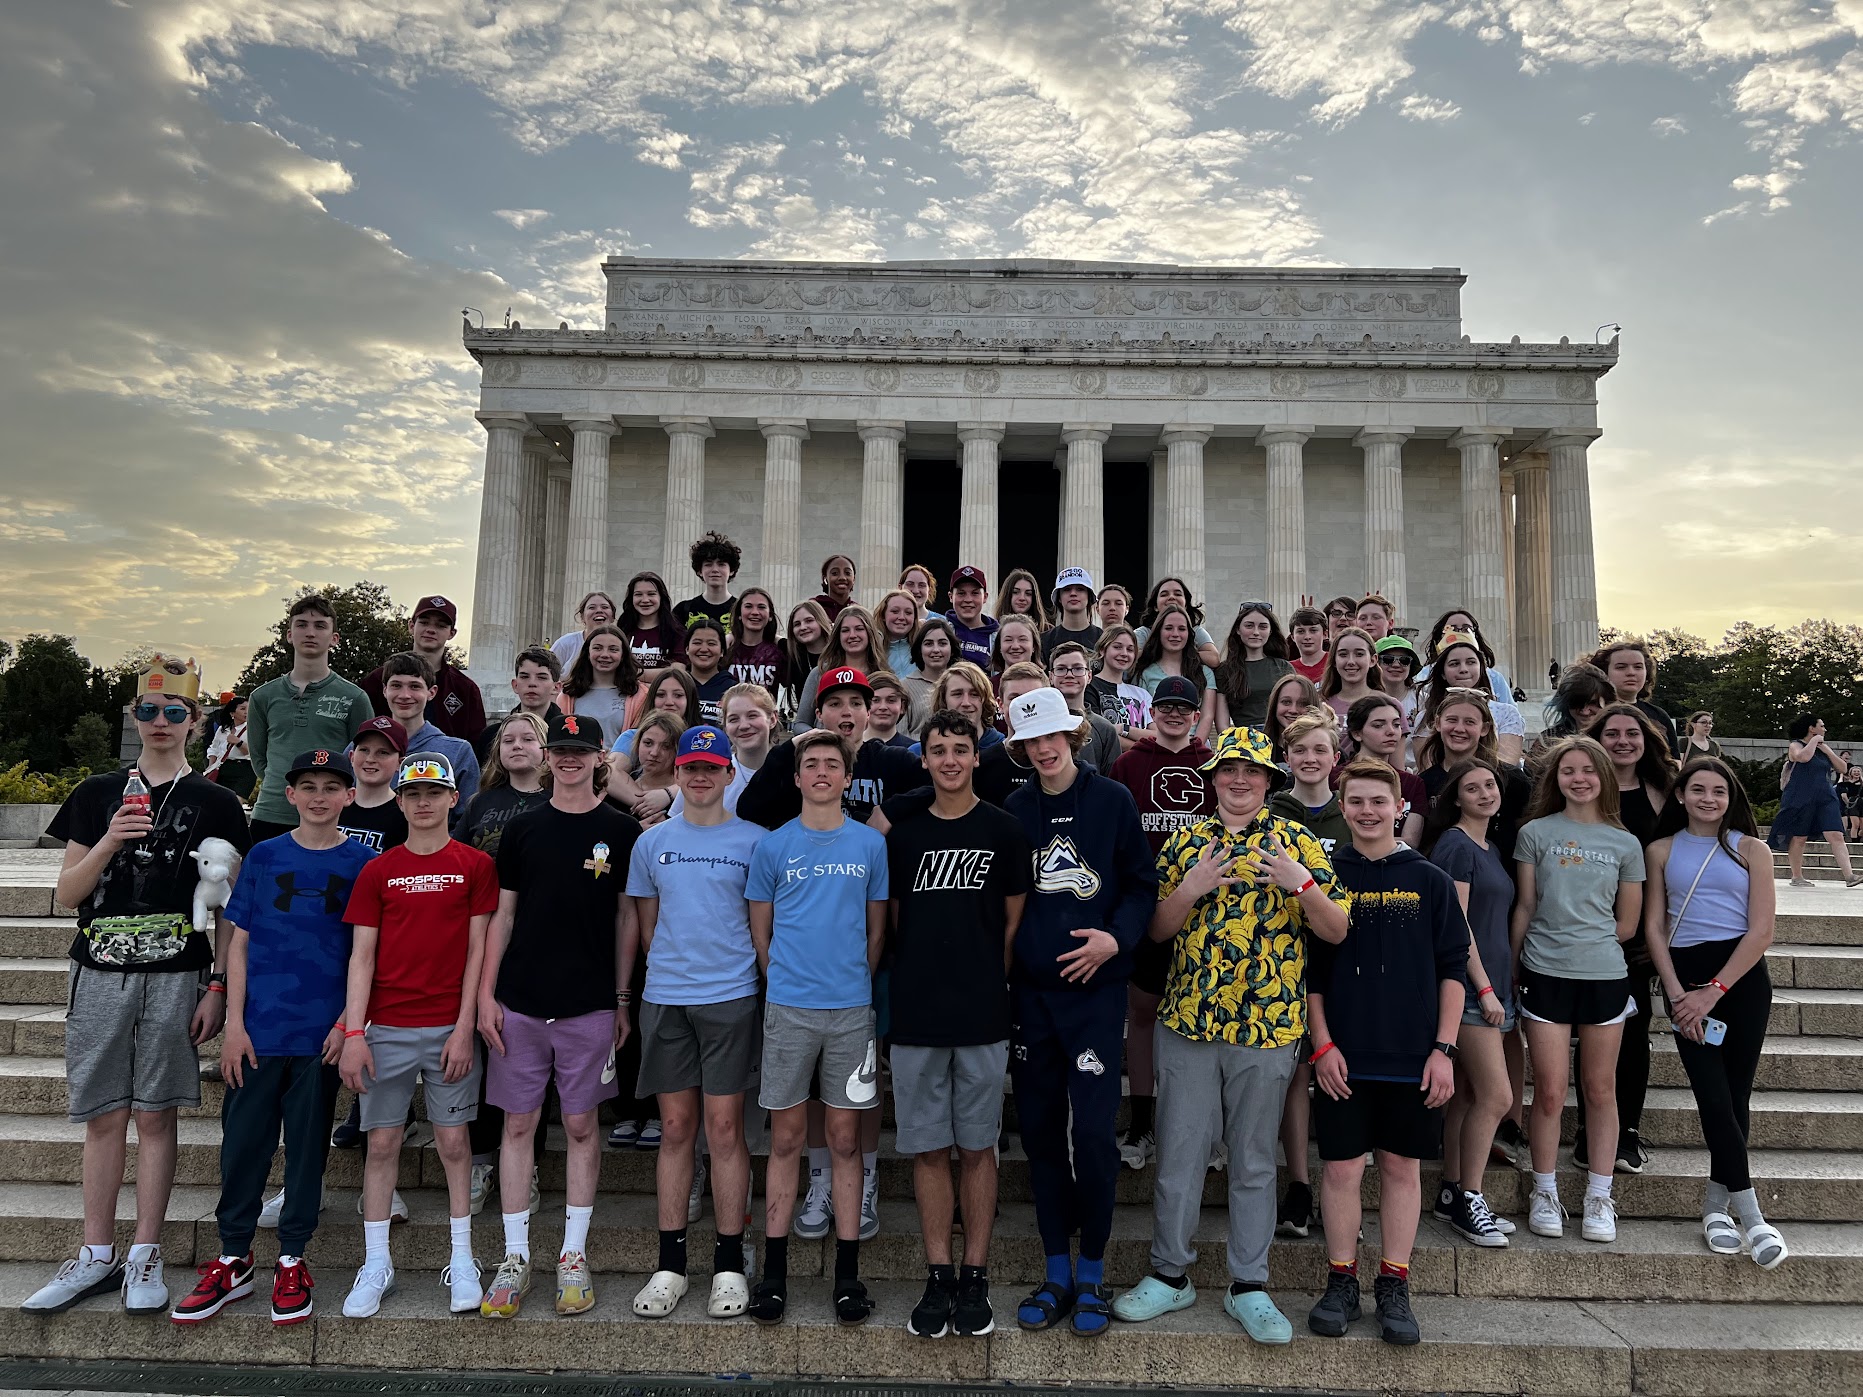 Students in front of Lincoln Memorial